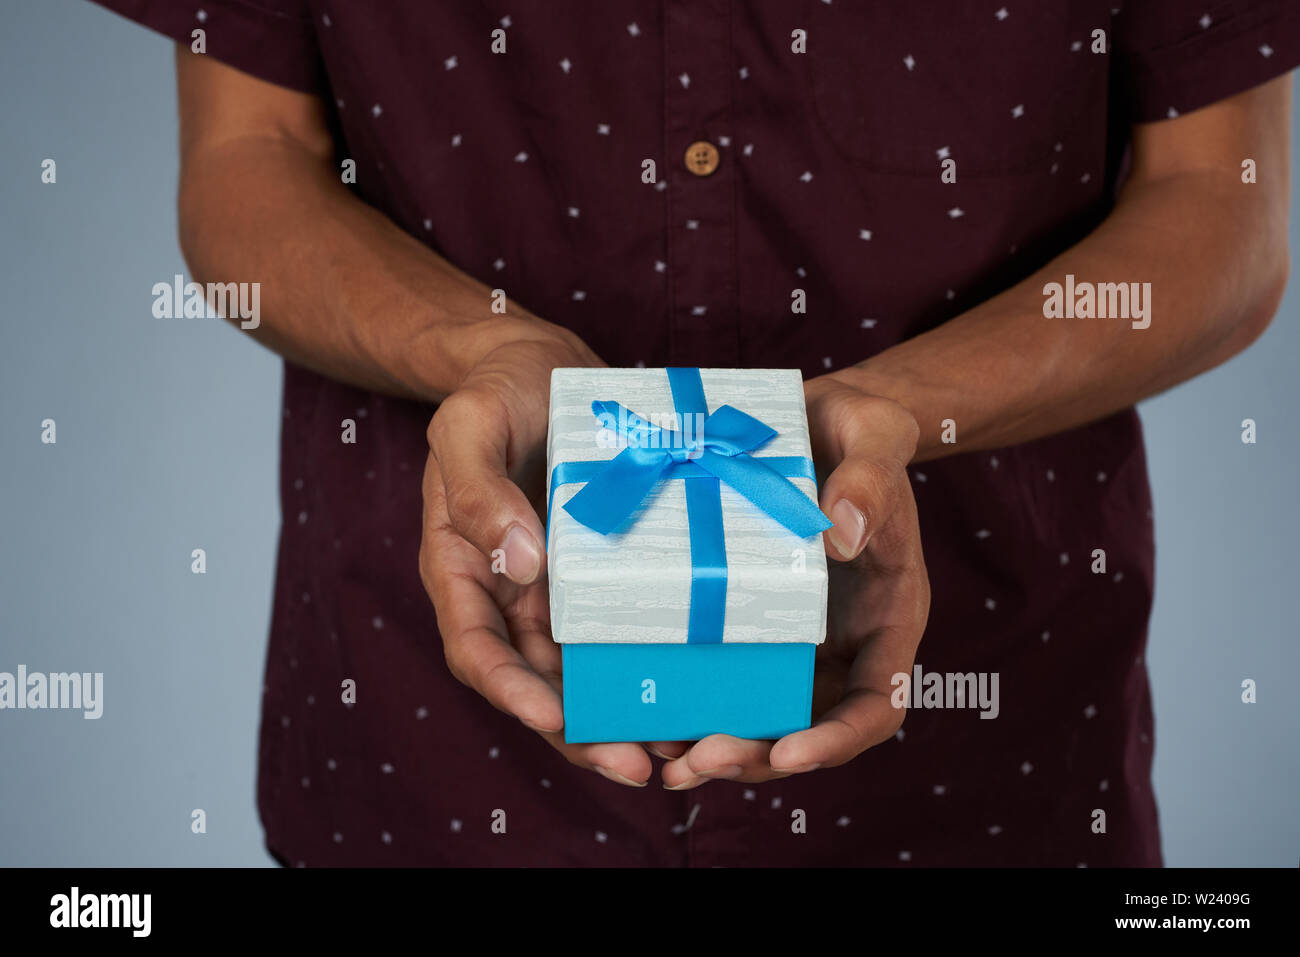 Small gift box in hand close up view. Giving present box Stock Photo